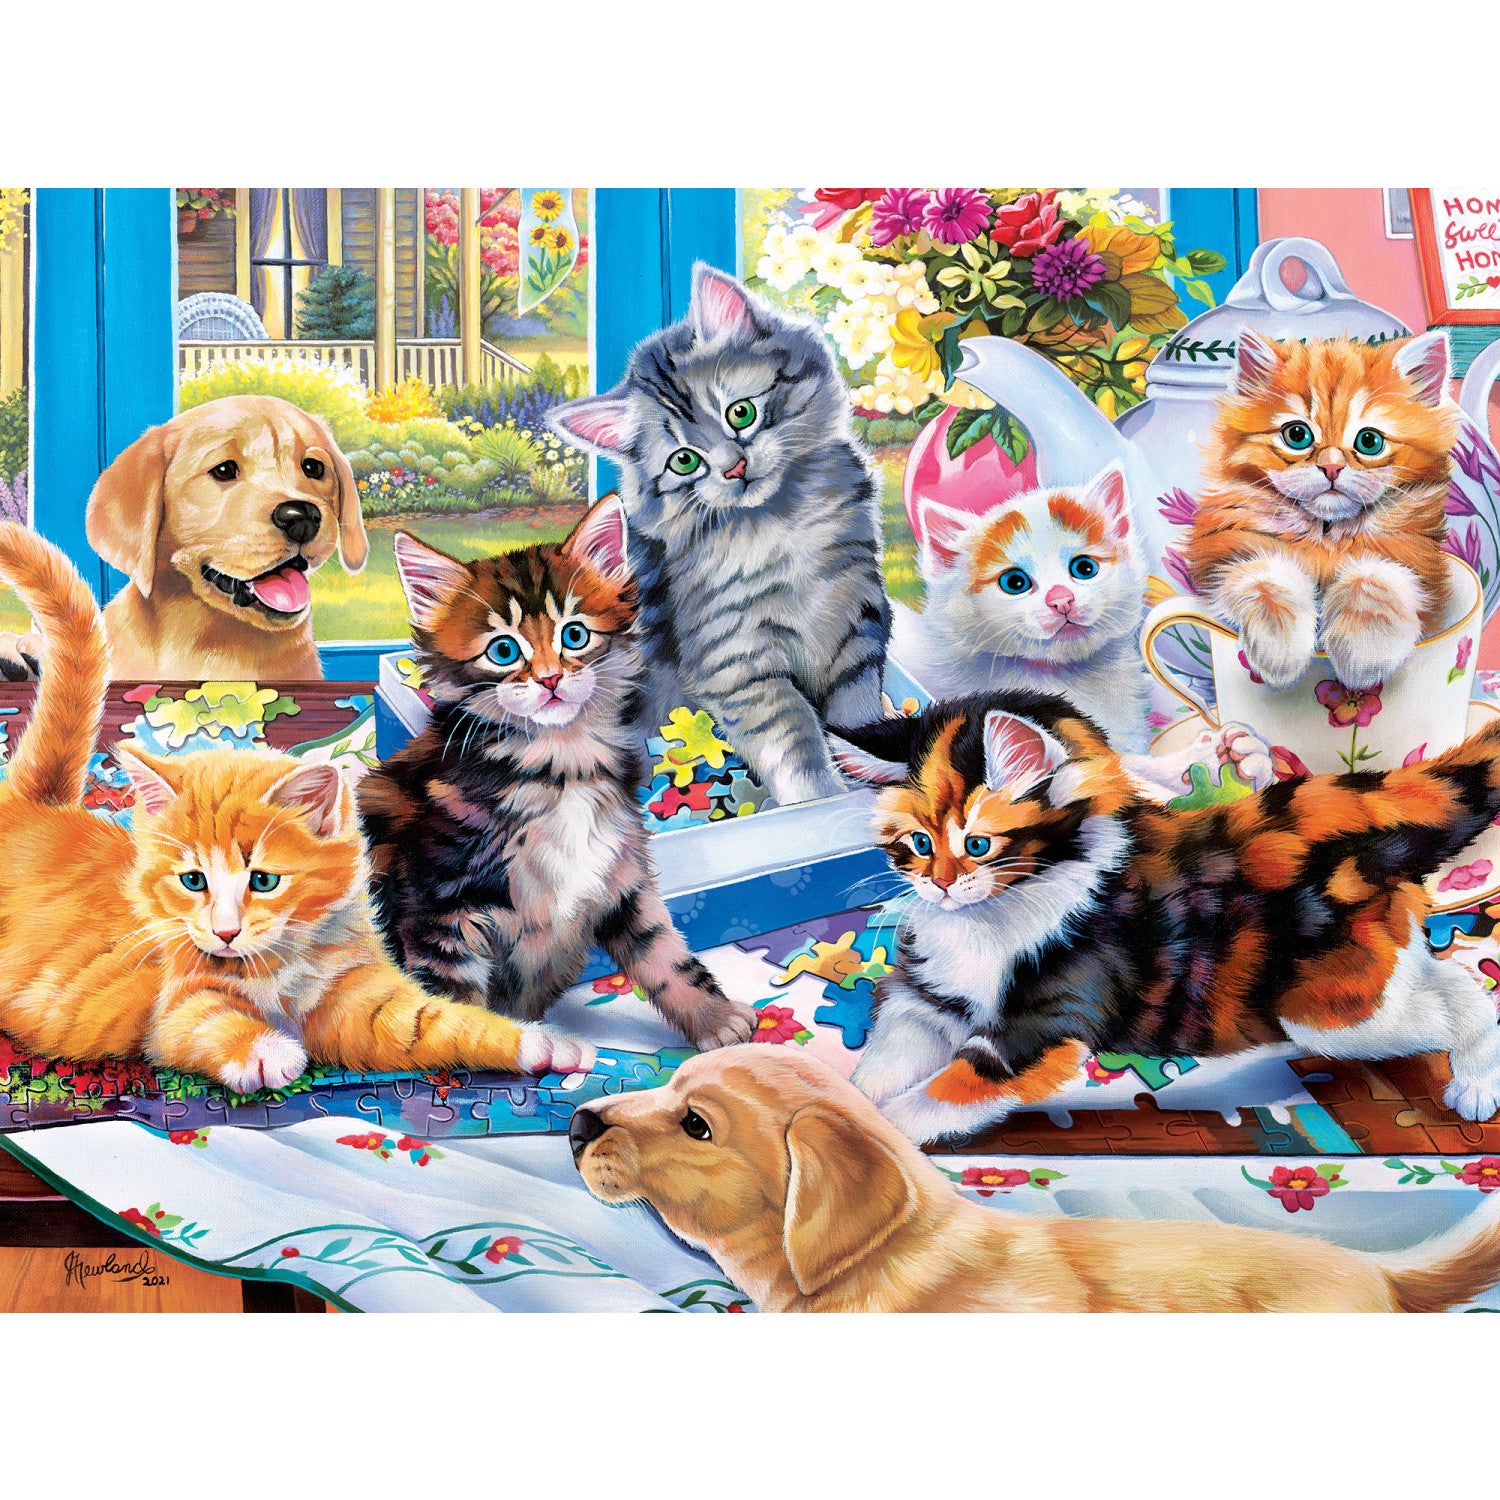 Family Time - Puzzling Gone Wild 400 Piece Puzzle